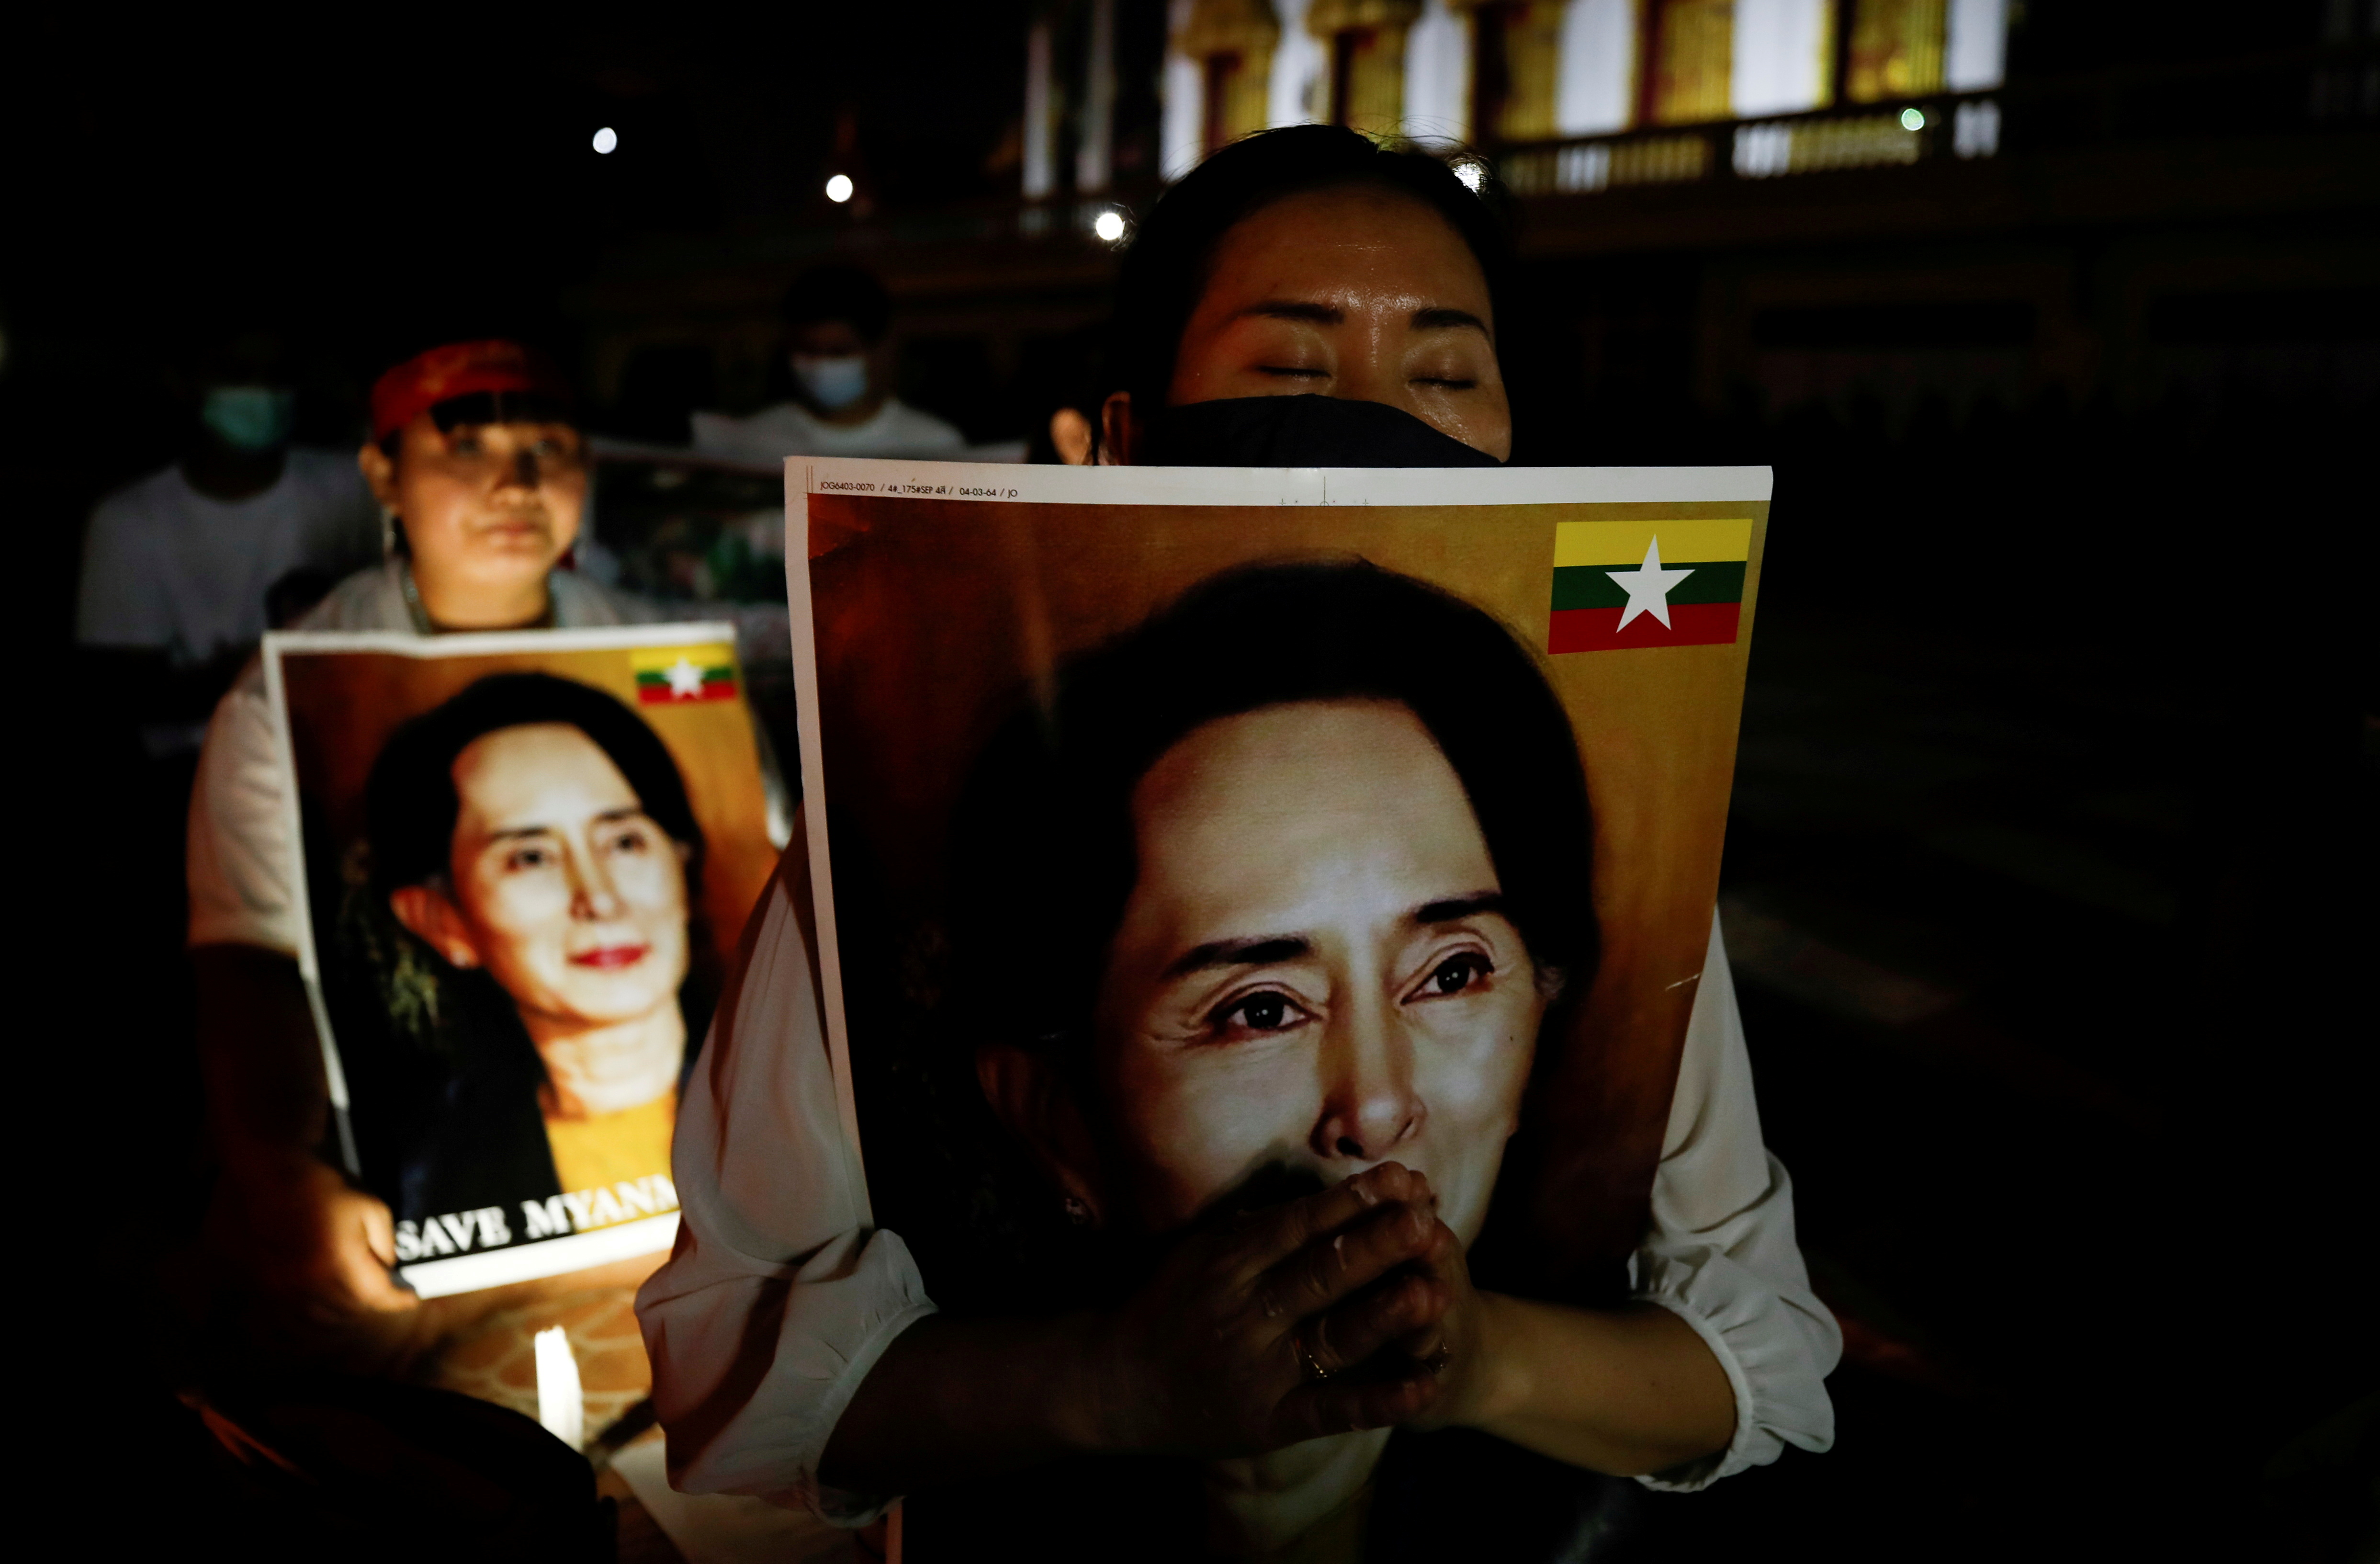 Migrants protesting against the military junta in Myanmar hold pictures of leader Aung San Suu Kyi, during a candlelight vigil at a Buddhist temple in Bangkok, Thailand, March 28, 2021. REUTERS/Jorge Silva/File Photo